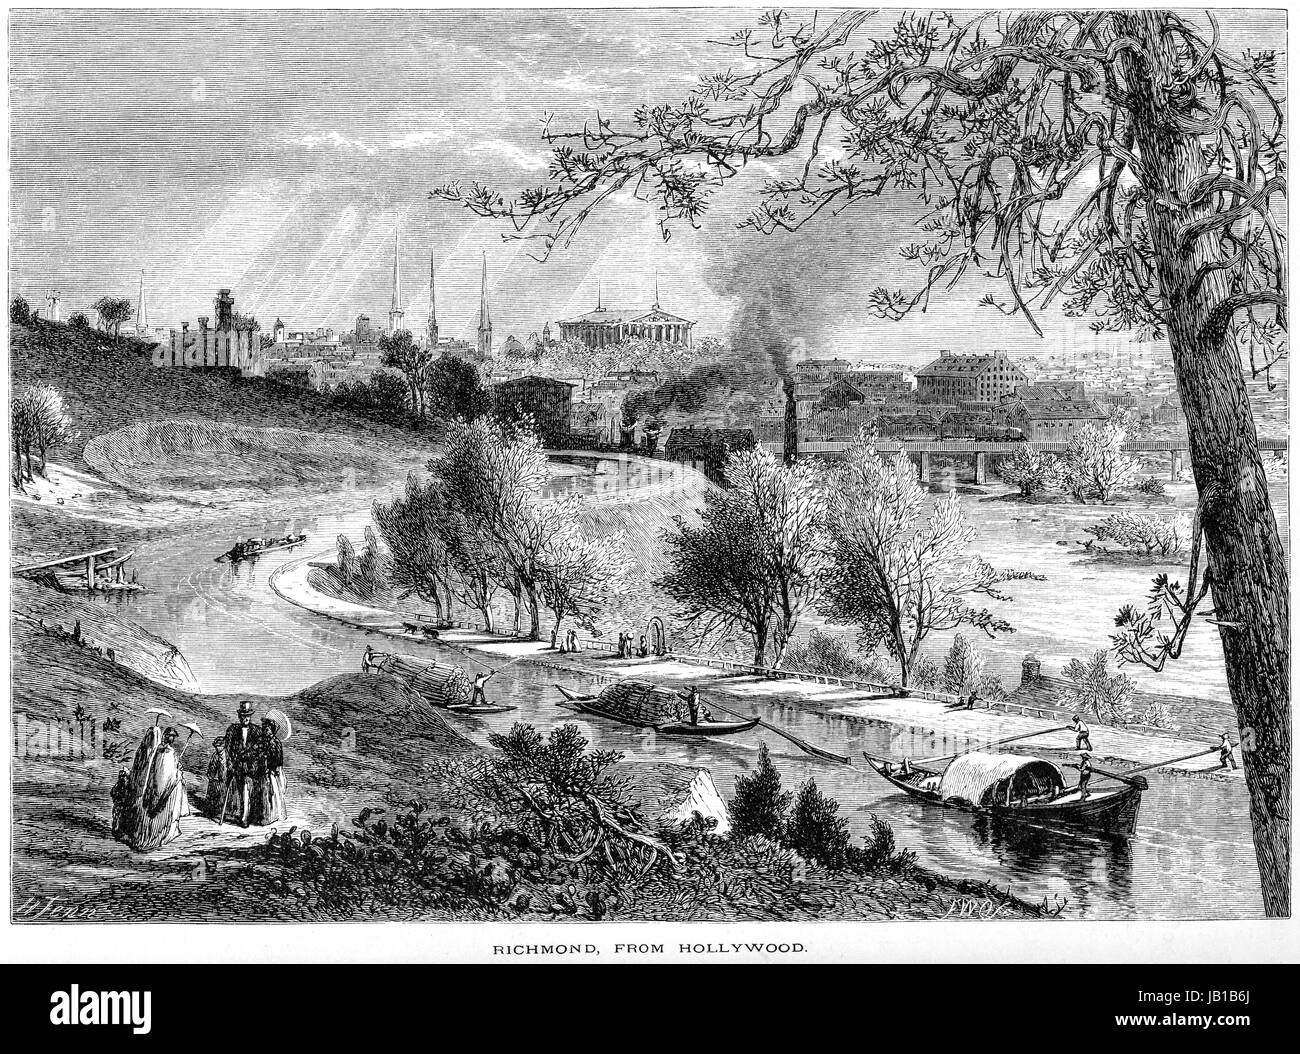 An engraving of Richmond from Hollywood scanned at high resolution from a book printed in 1872.  Believed copyright free. Stock Photo